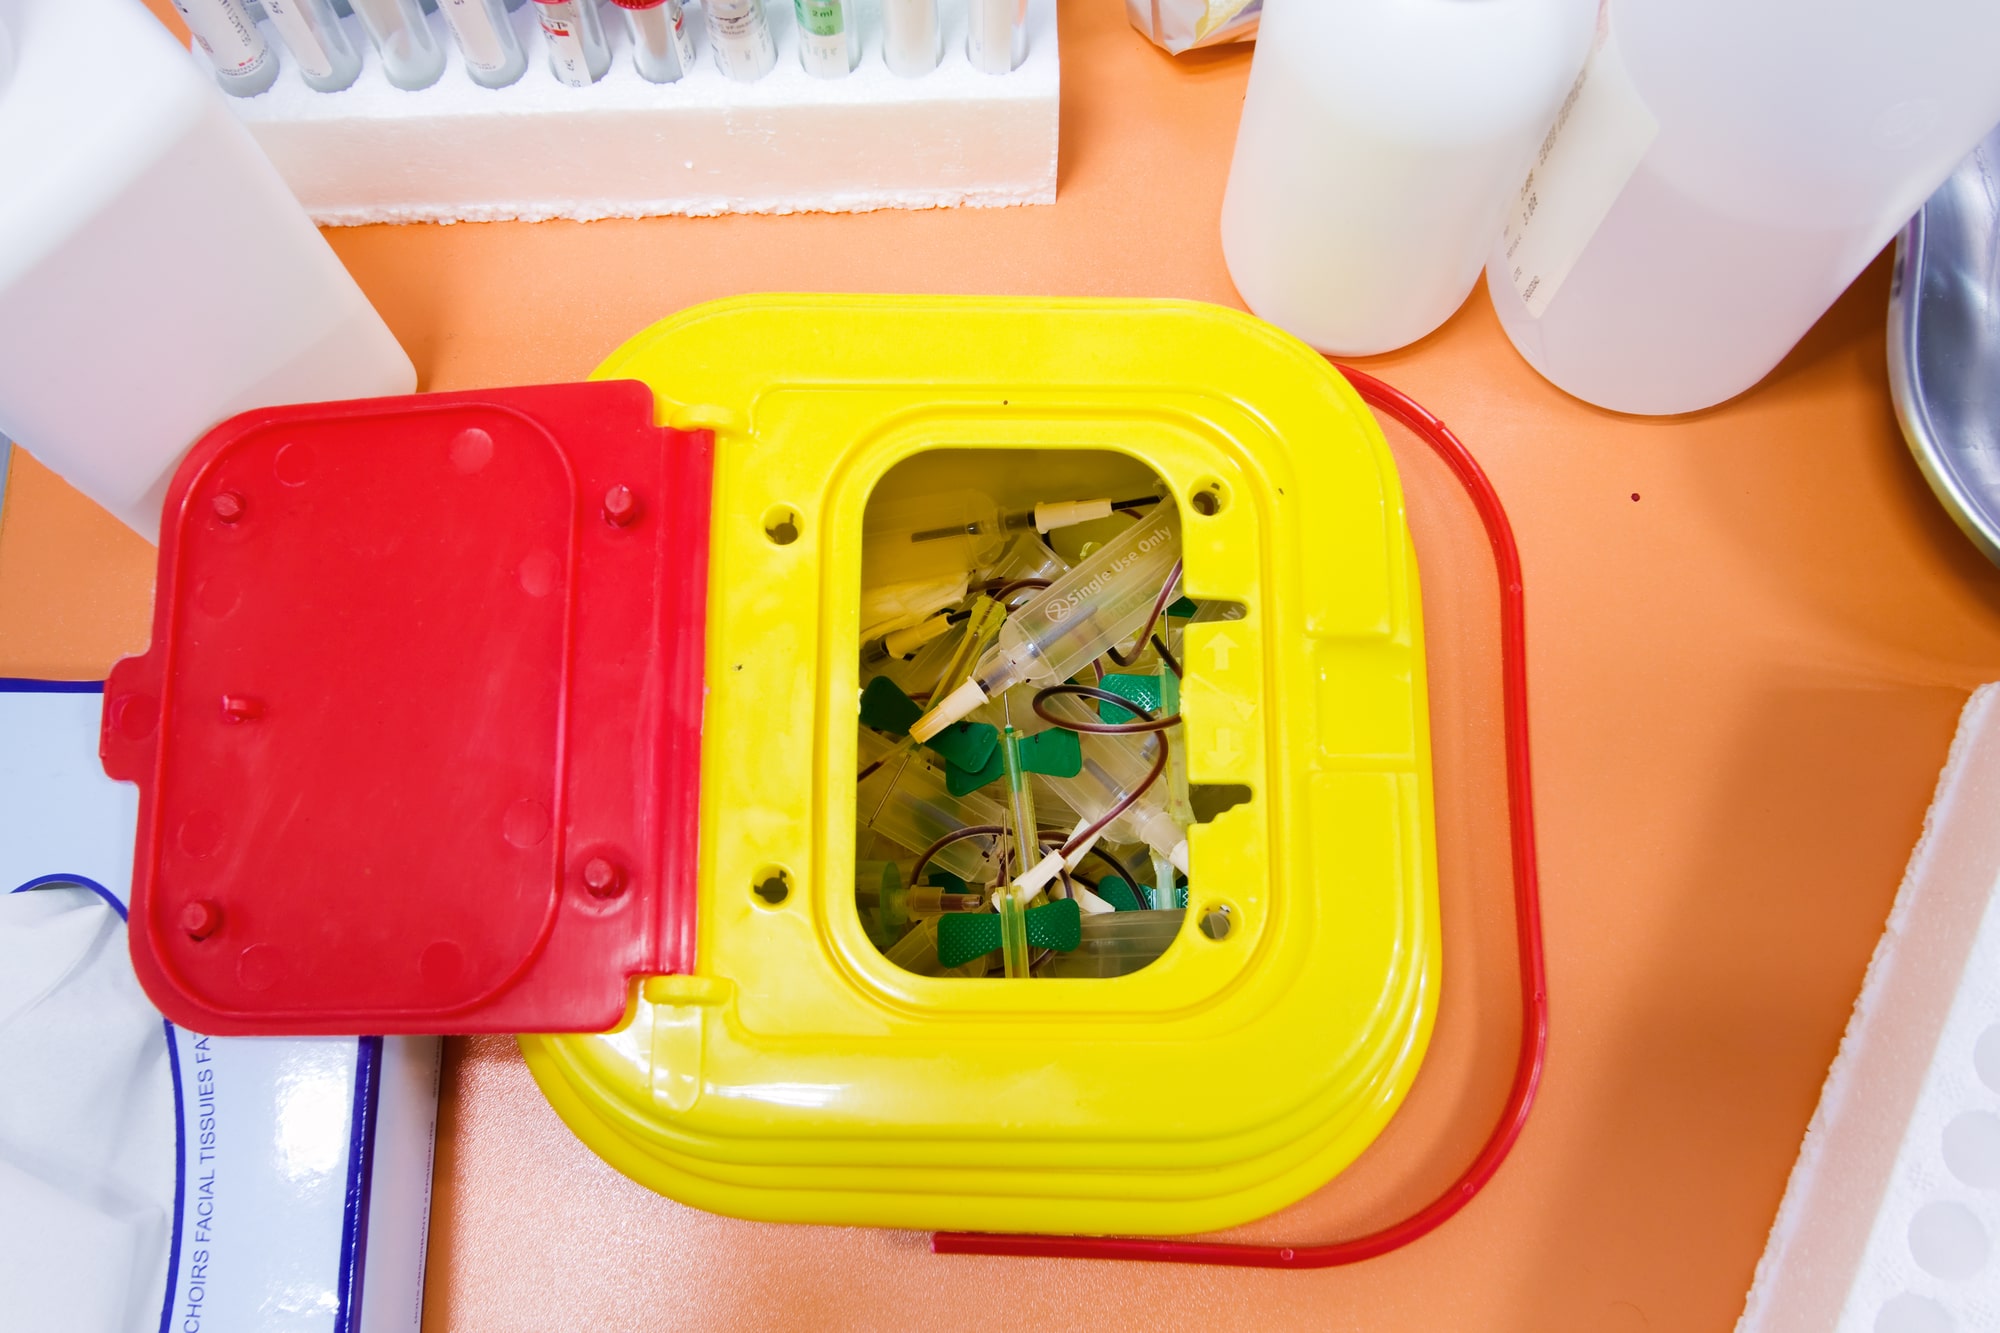 What to do with medical waste?